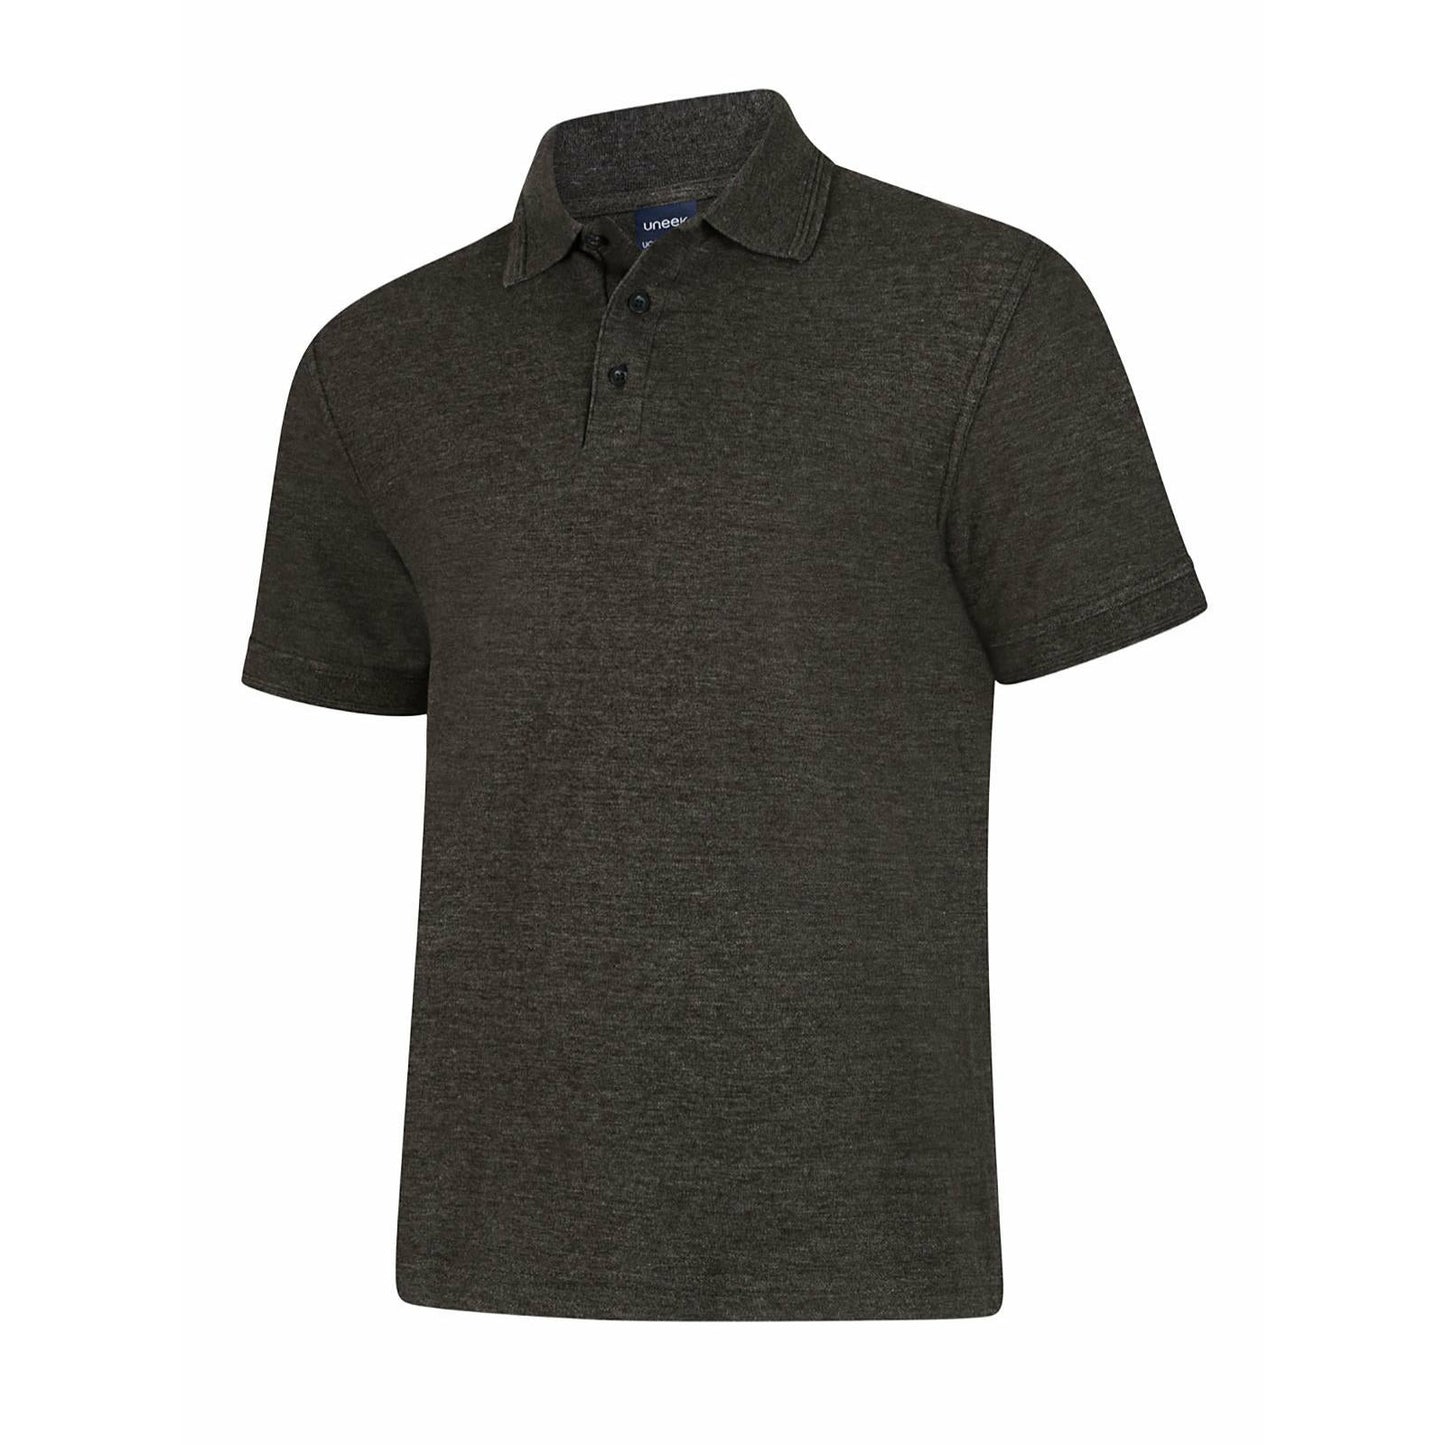 Deluxe Polo Shirt (2XL - 4XL) - Charcoal